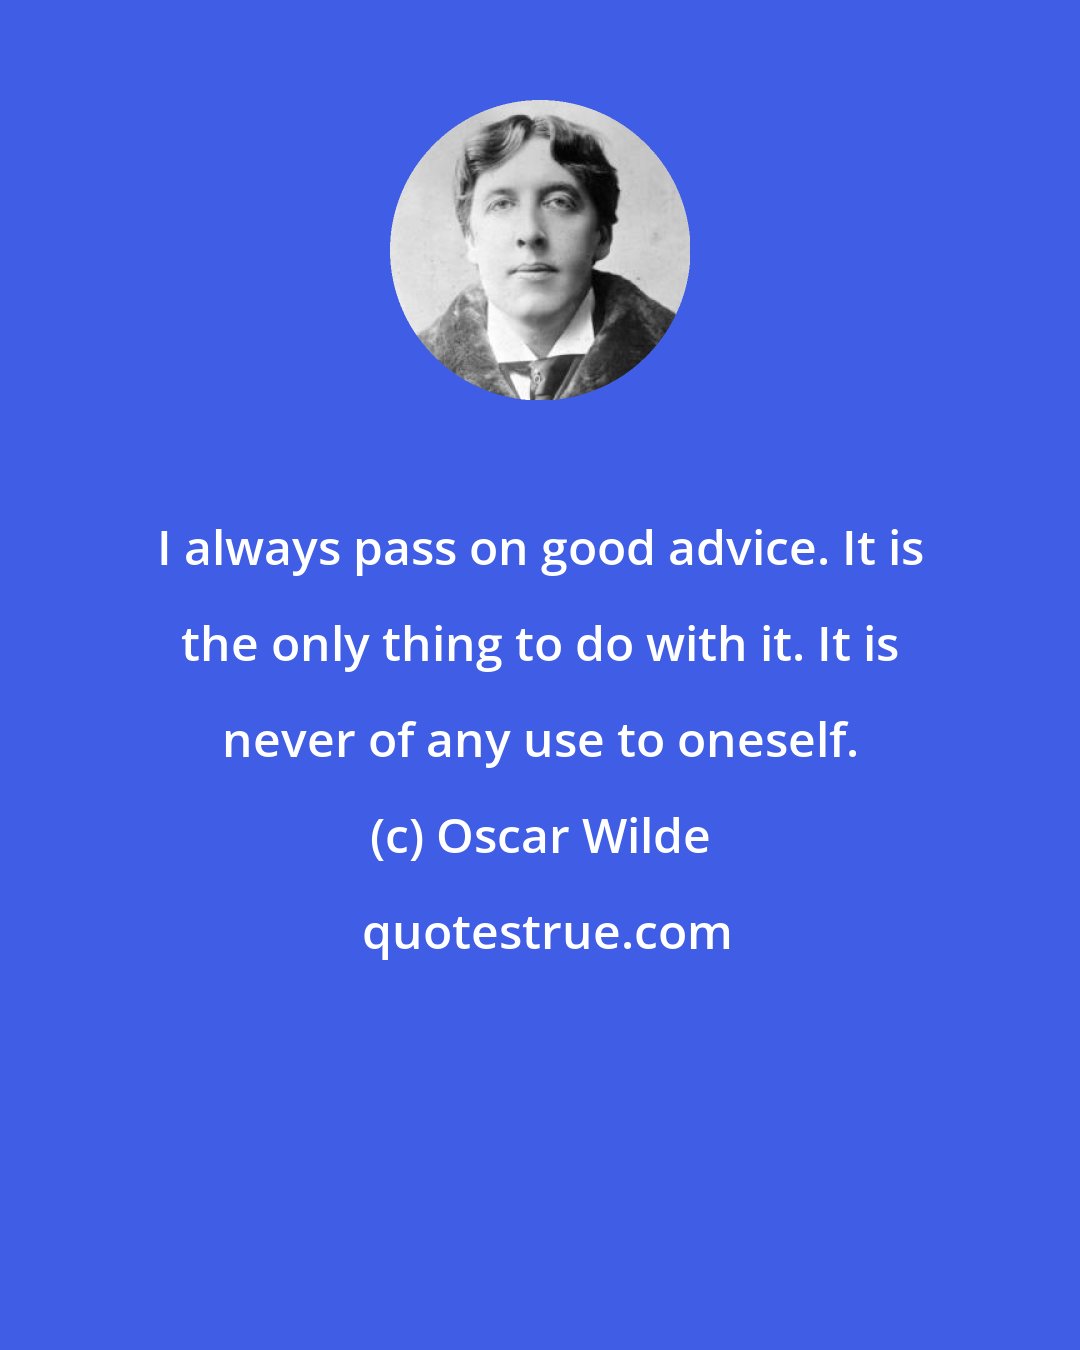 Oscar Wilde: I always pass on good advice. It is the only thing to do with it. It is never of any use to oneself.